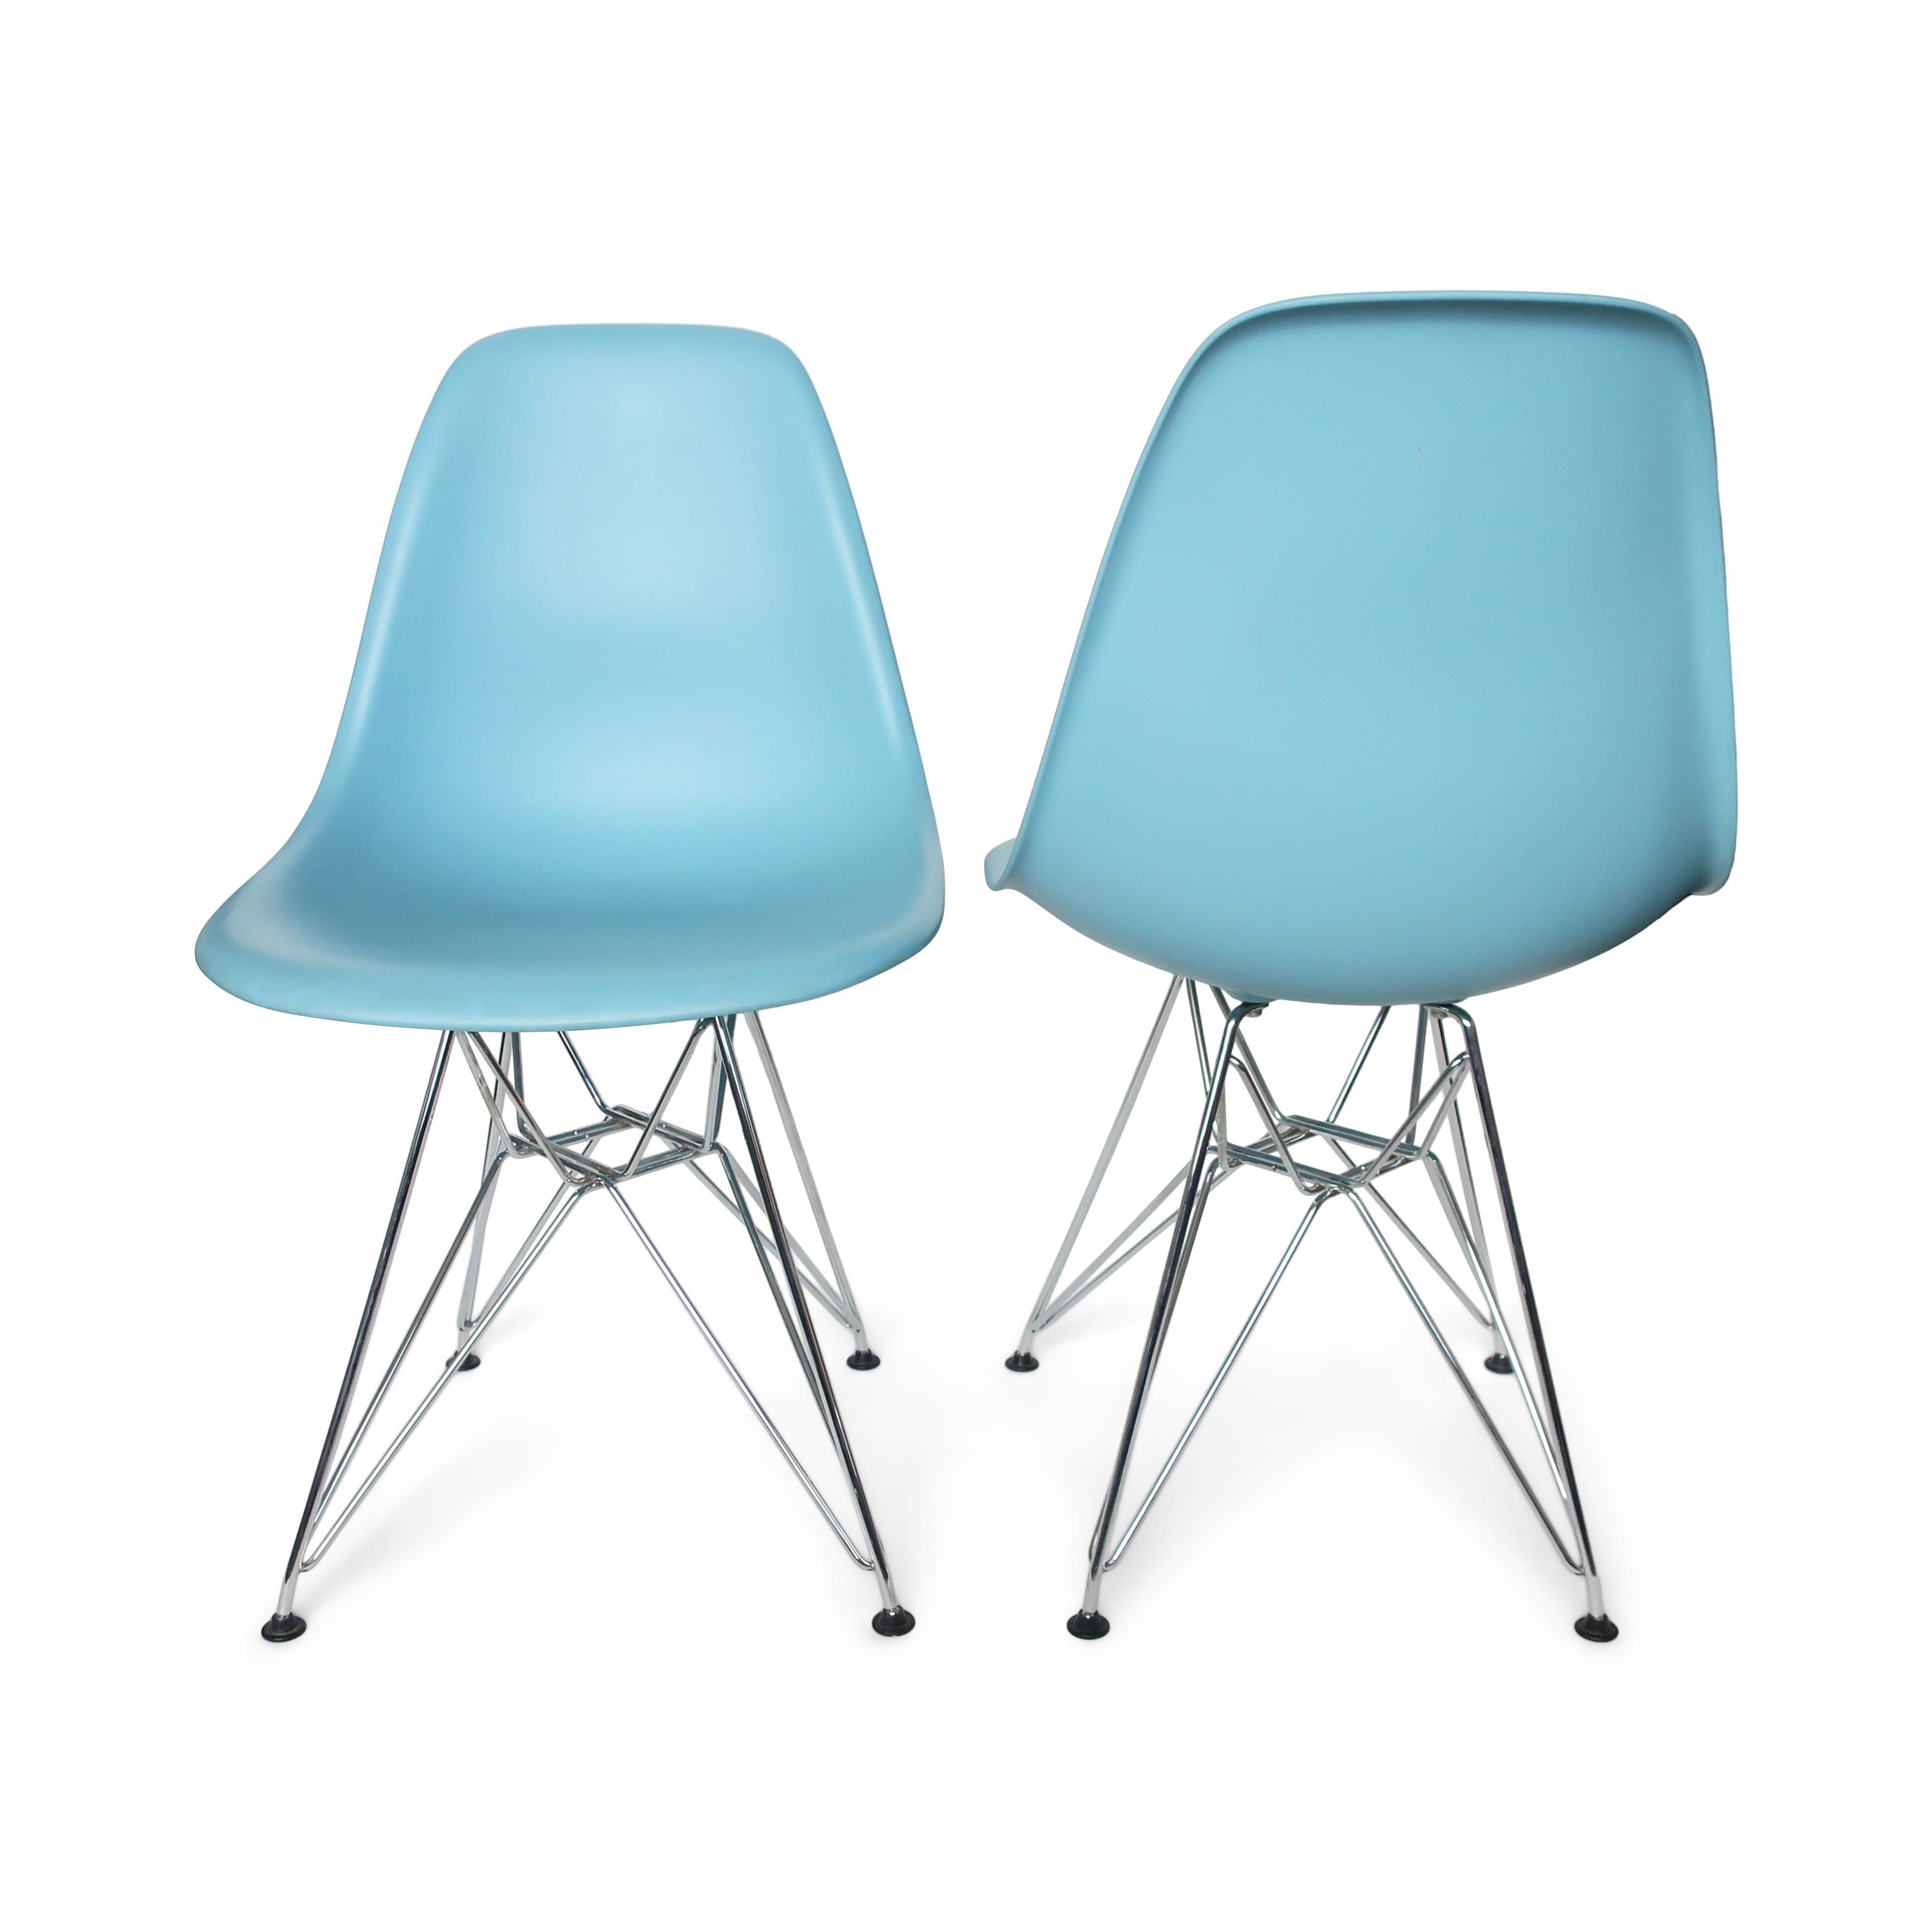 Mid-Century Modern Pair of Blue Eames Dining Chairs with Eiffel Bases